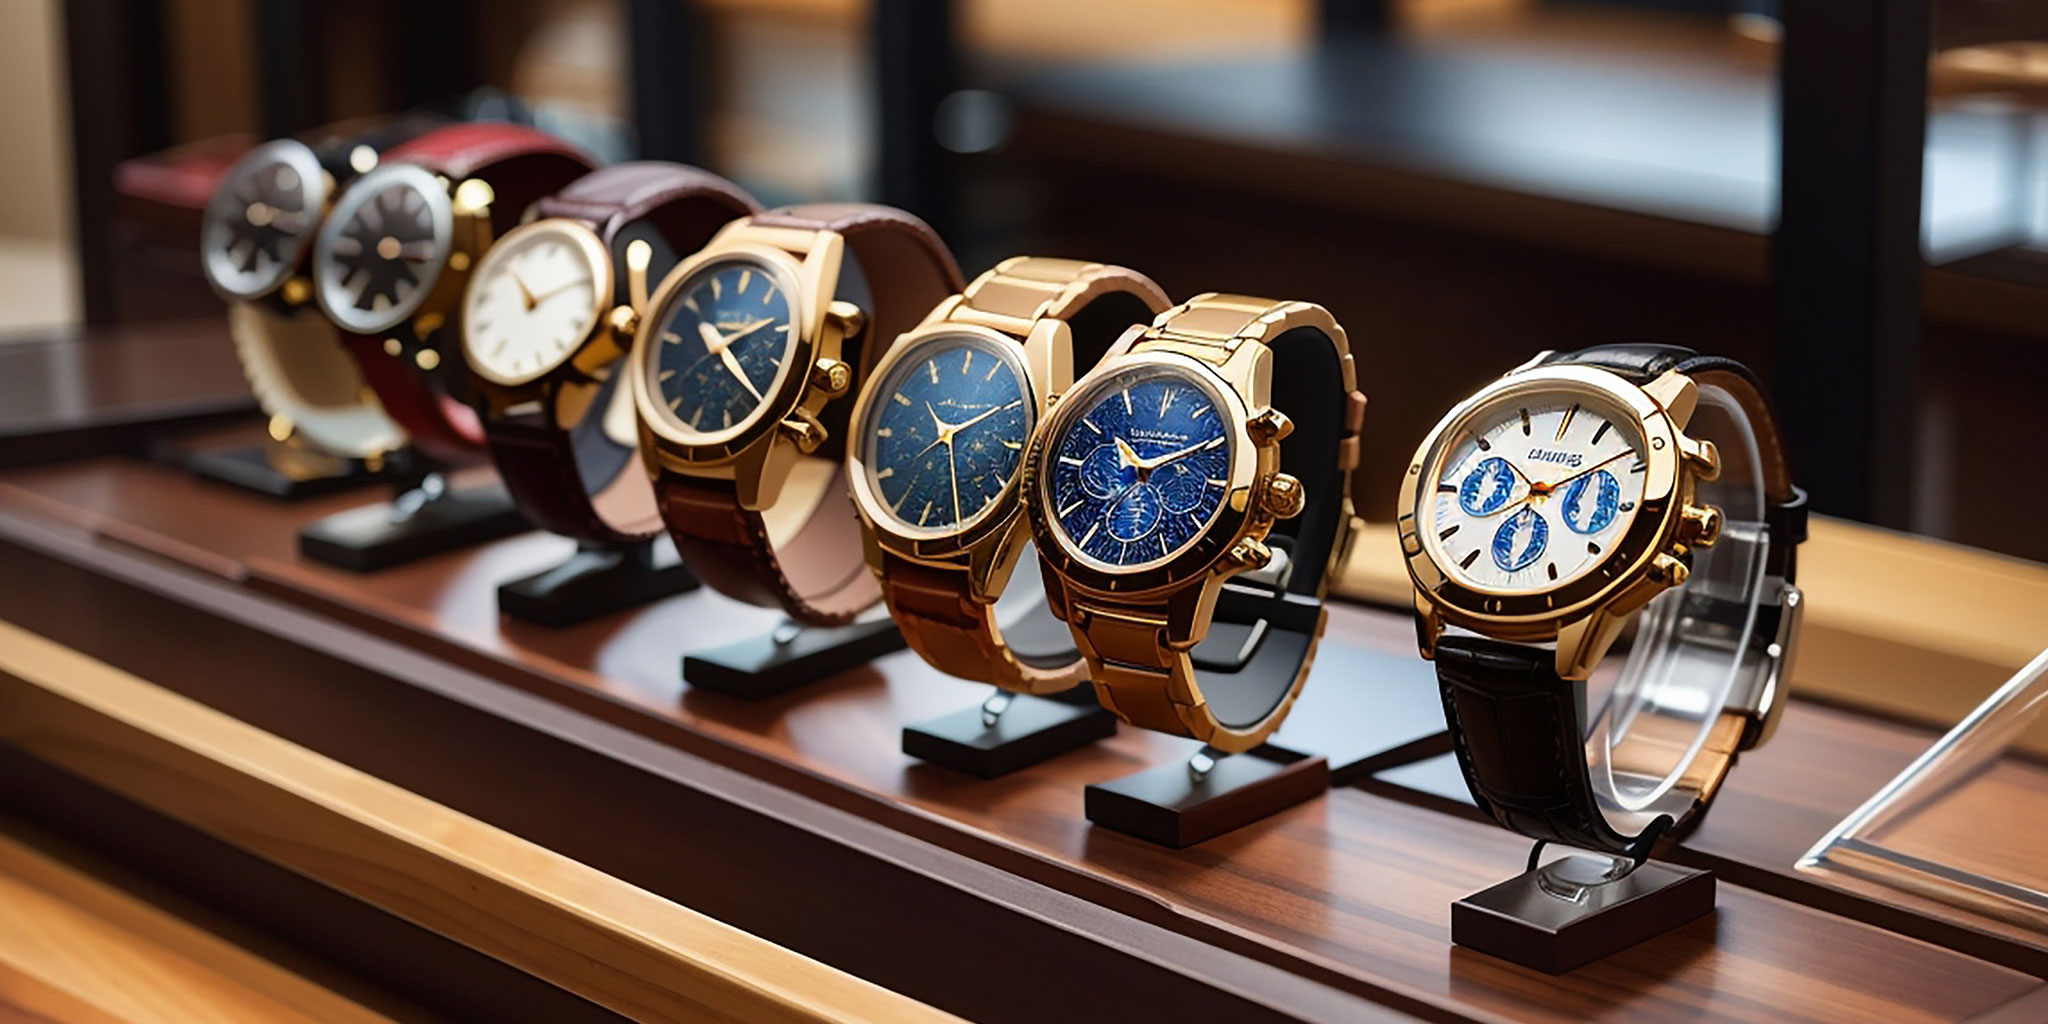 theassetsadvisor - Which are the most luxury watches in dubai